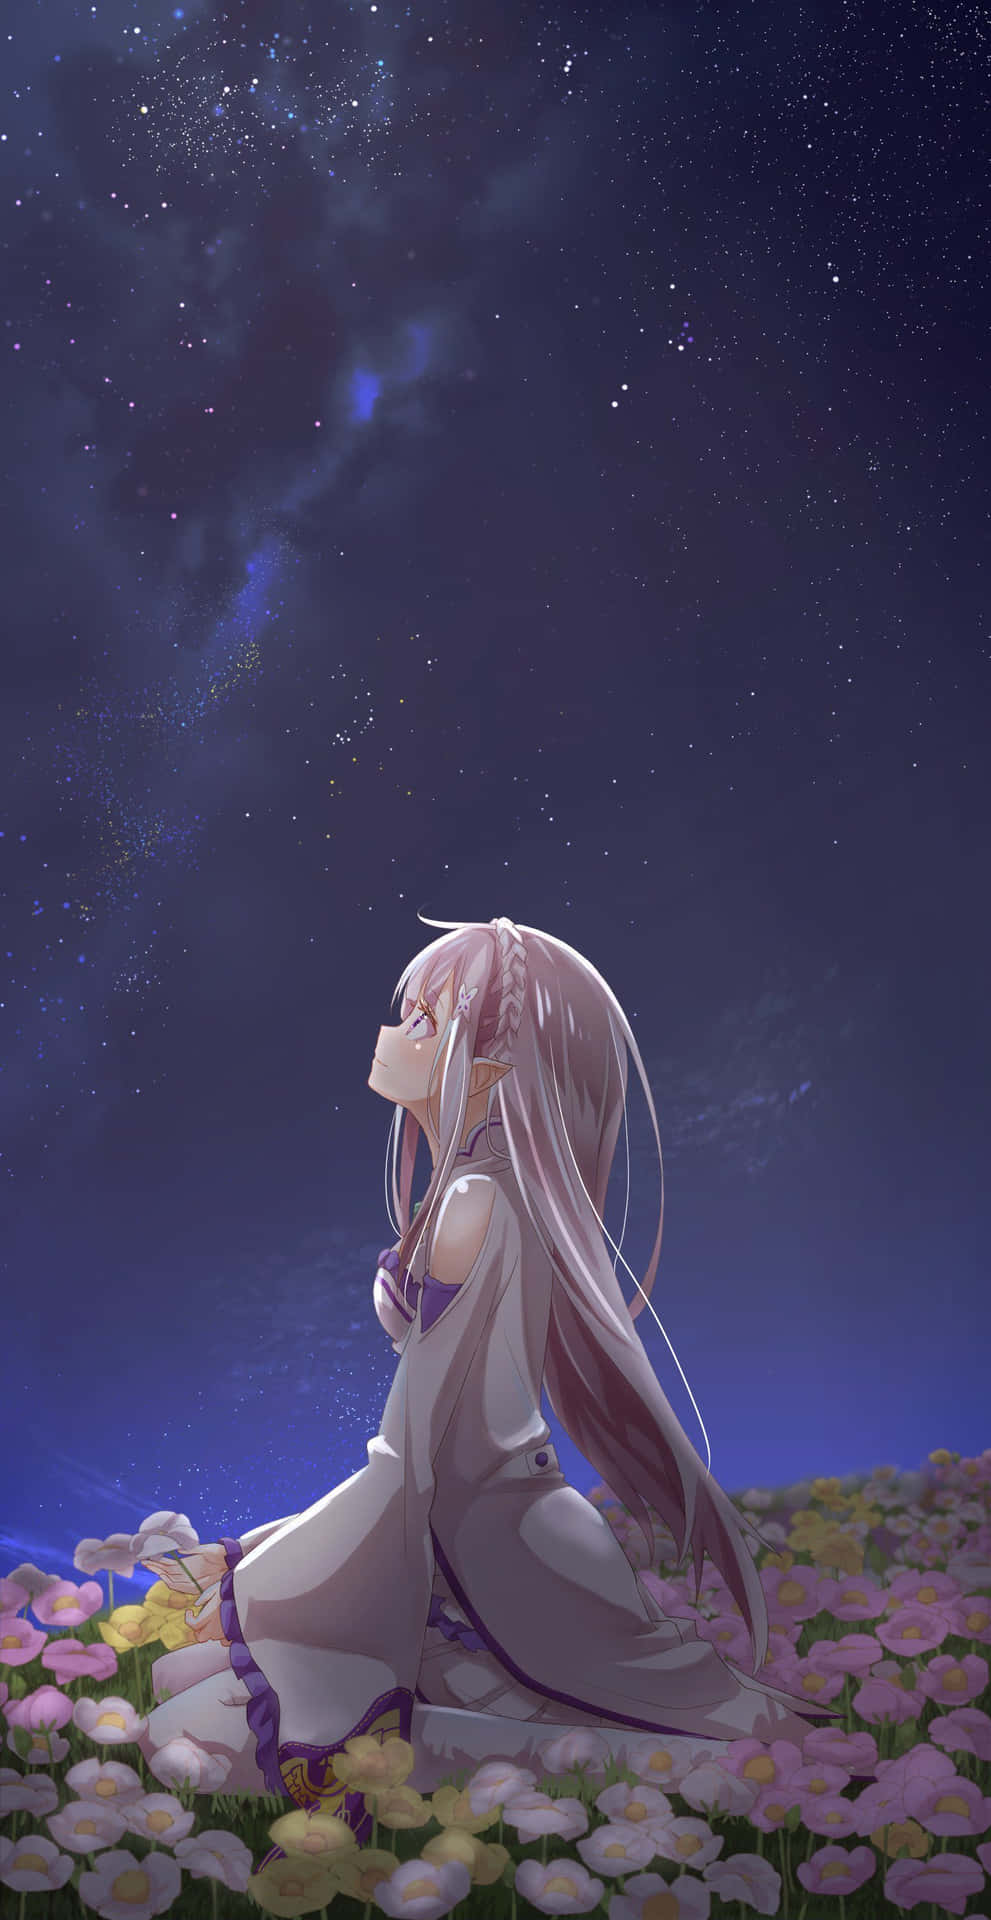 A beautiful sad anime girl in contemplation Wallpaper